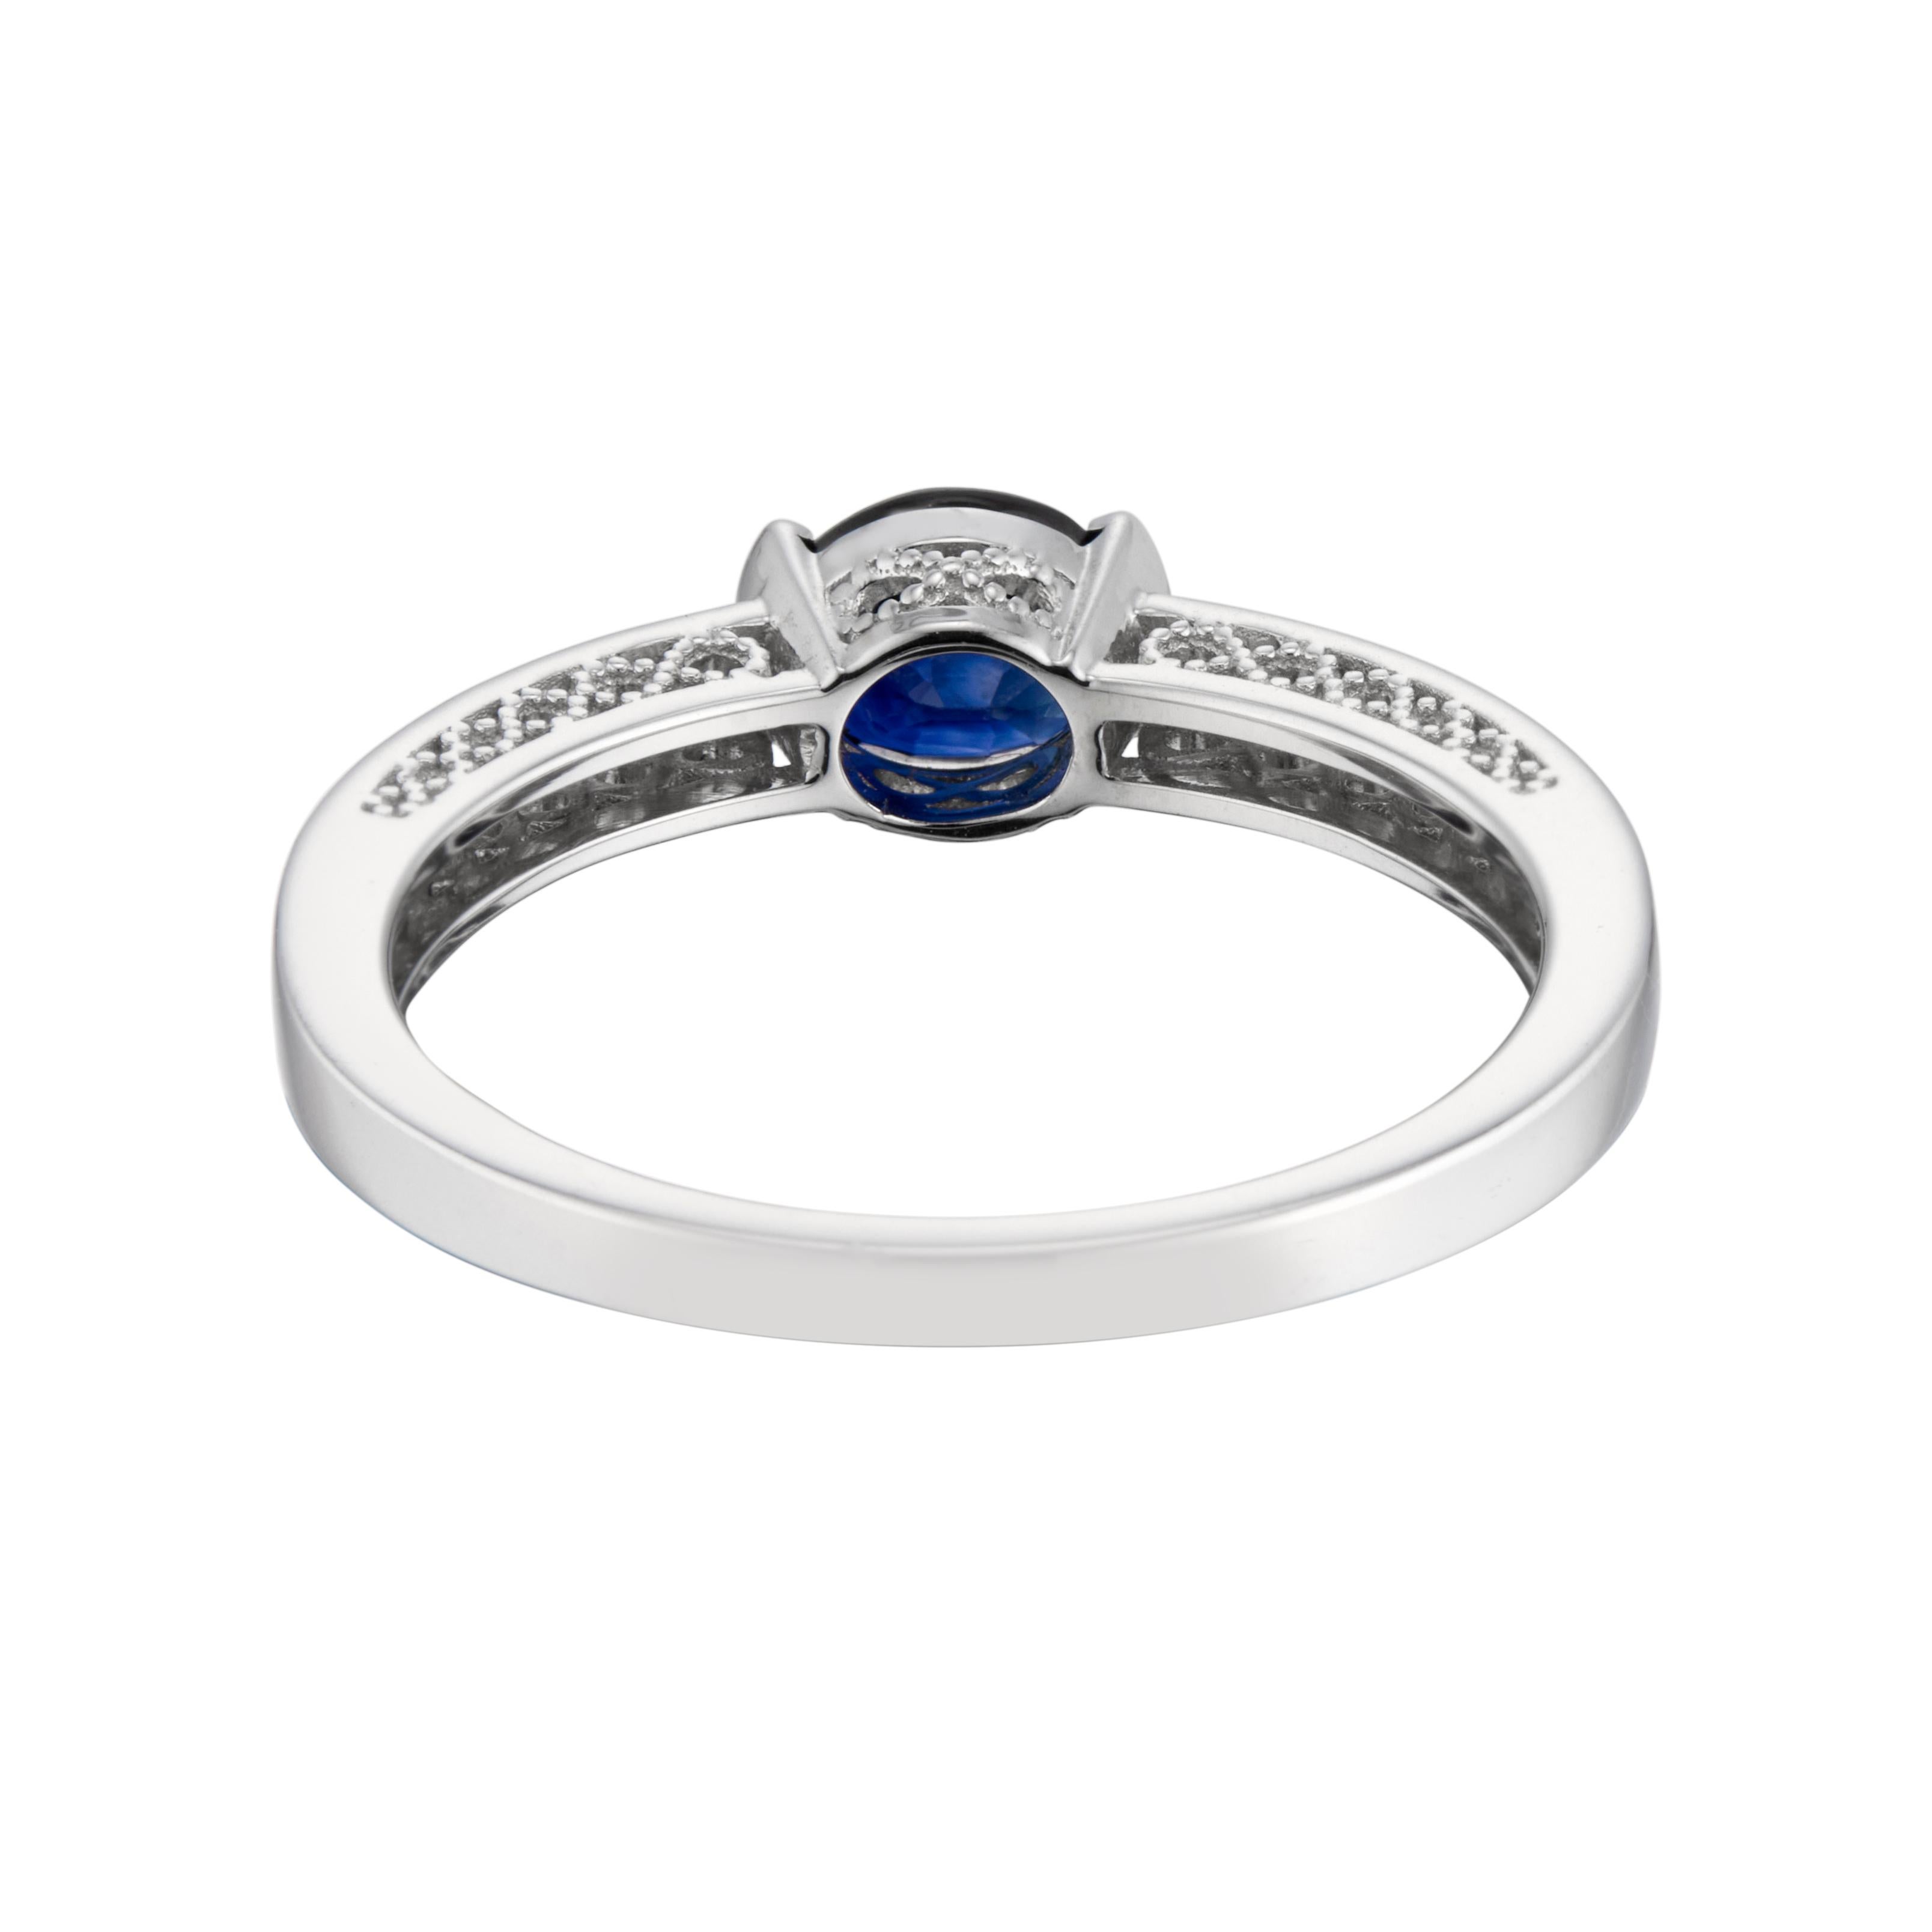 .83 Carat Blue Sapphire Diamond White Gold Engagement Ring In Excellent Condition For Sale In Stamford, CT